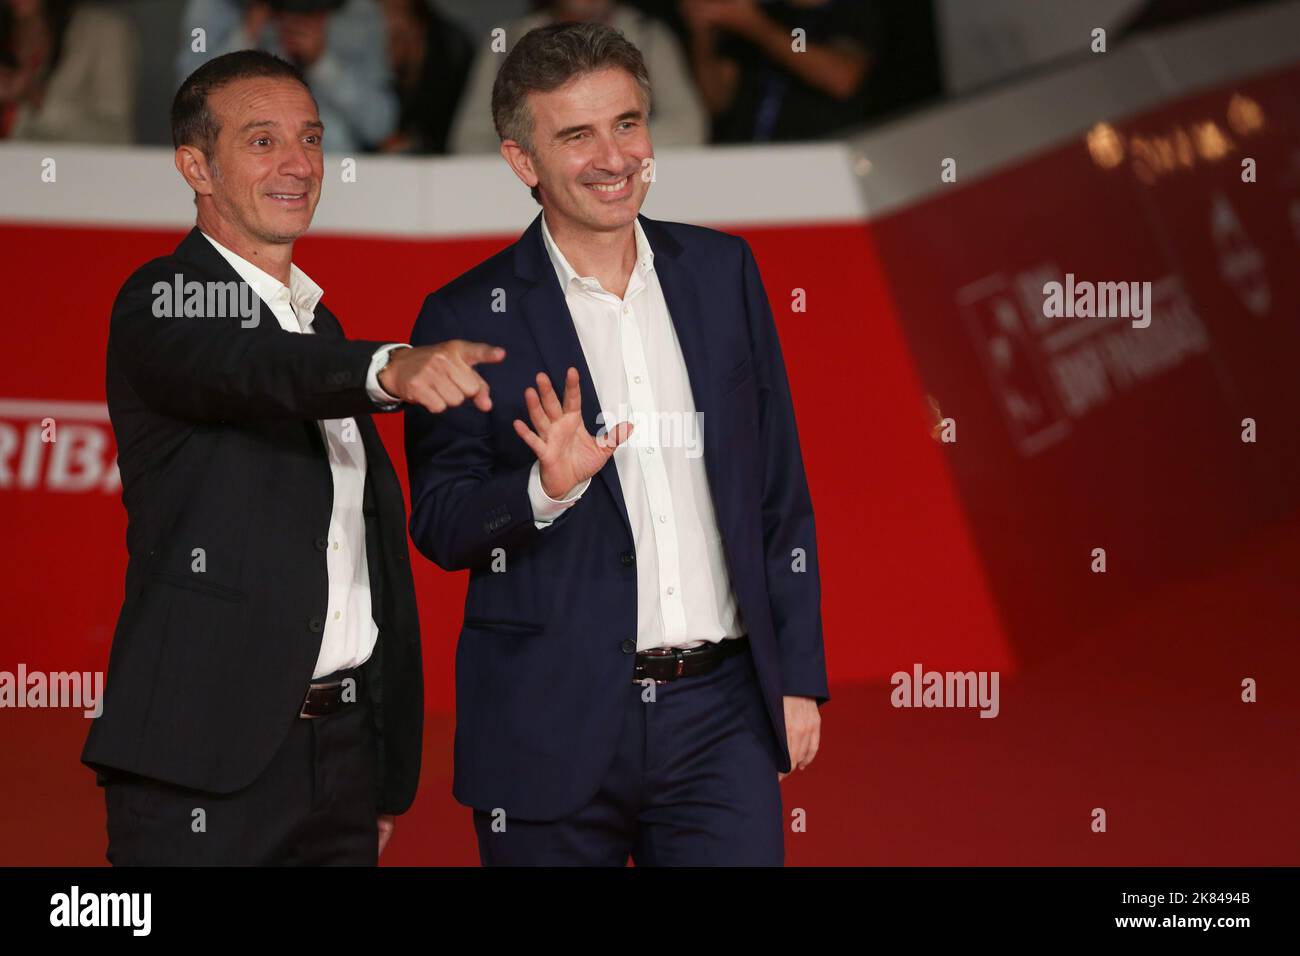 Rome, Italy. 20th Oct, 2022. (l) Salvo Ficarra and (r) Valentino Picone attend the red carpet of the movie 'La stranezza' at the opening of Rome Film Fest at Auditorium Parco della Musica. Credit: SOPA Images Limited/Alamy Live News Stock Photo